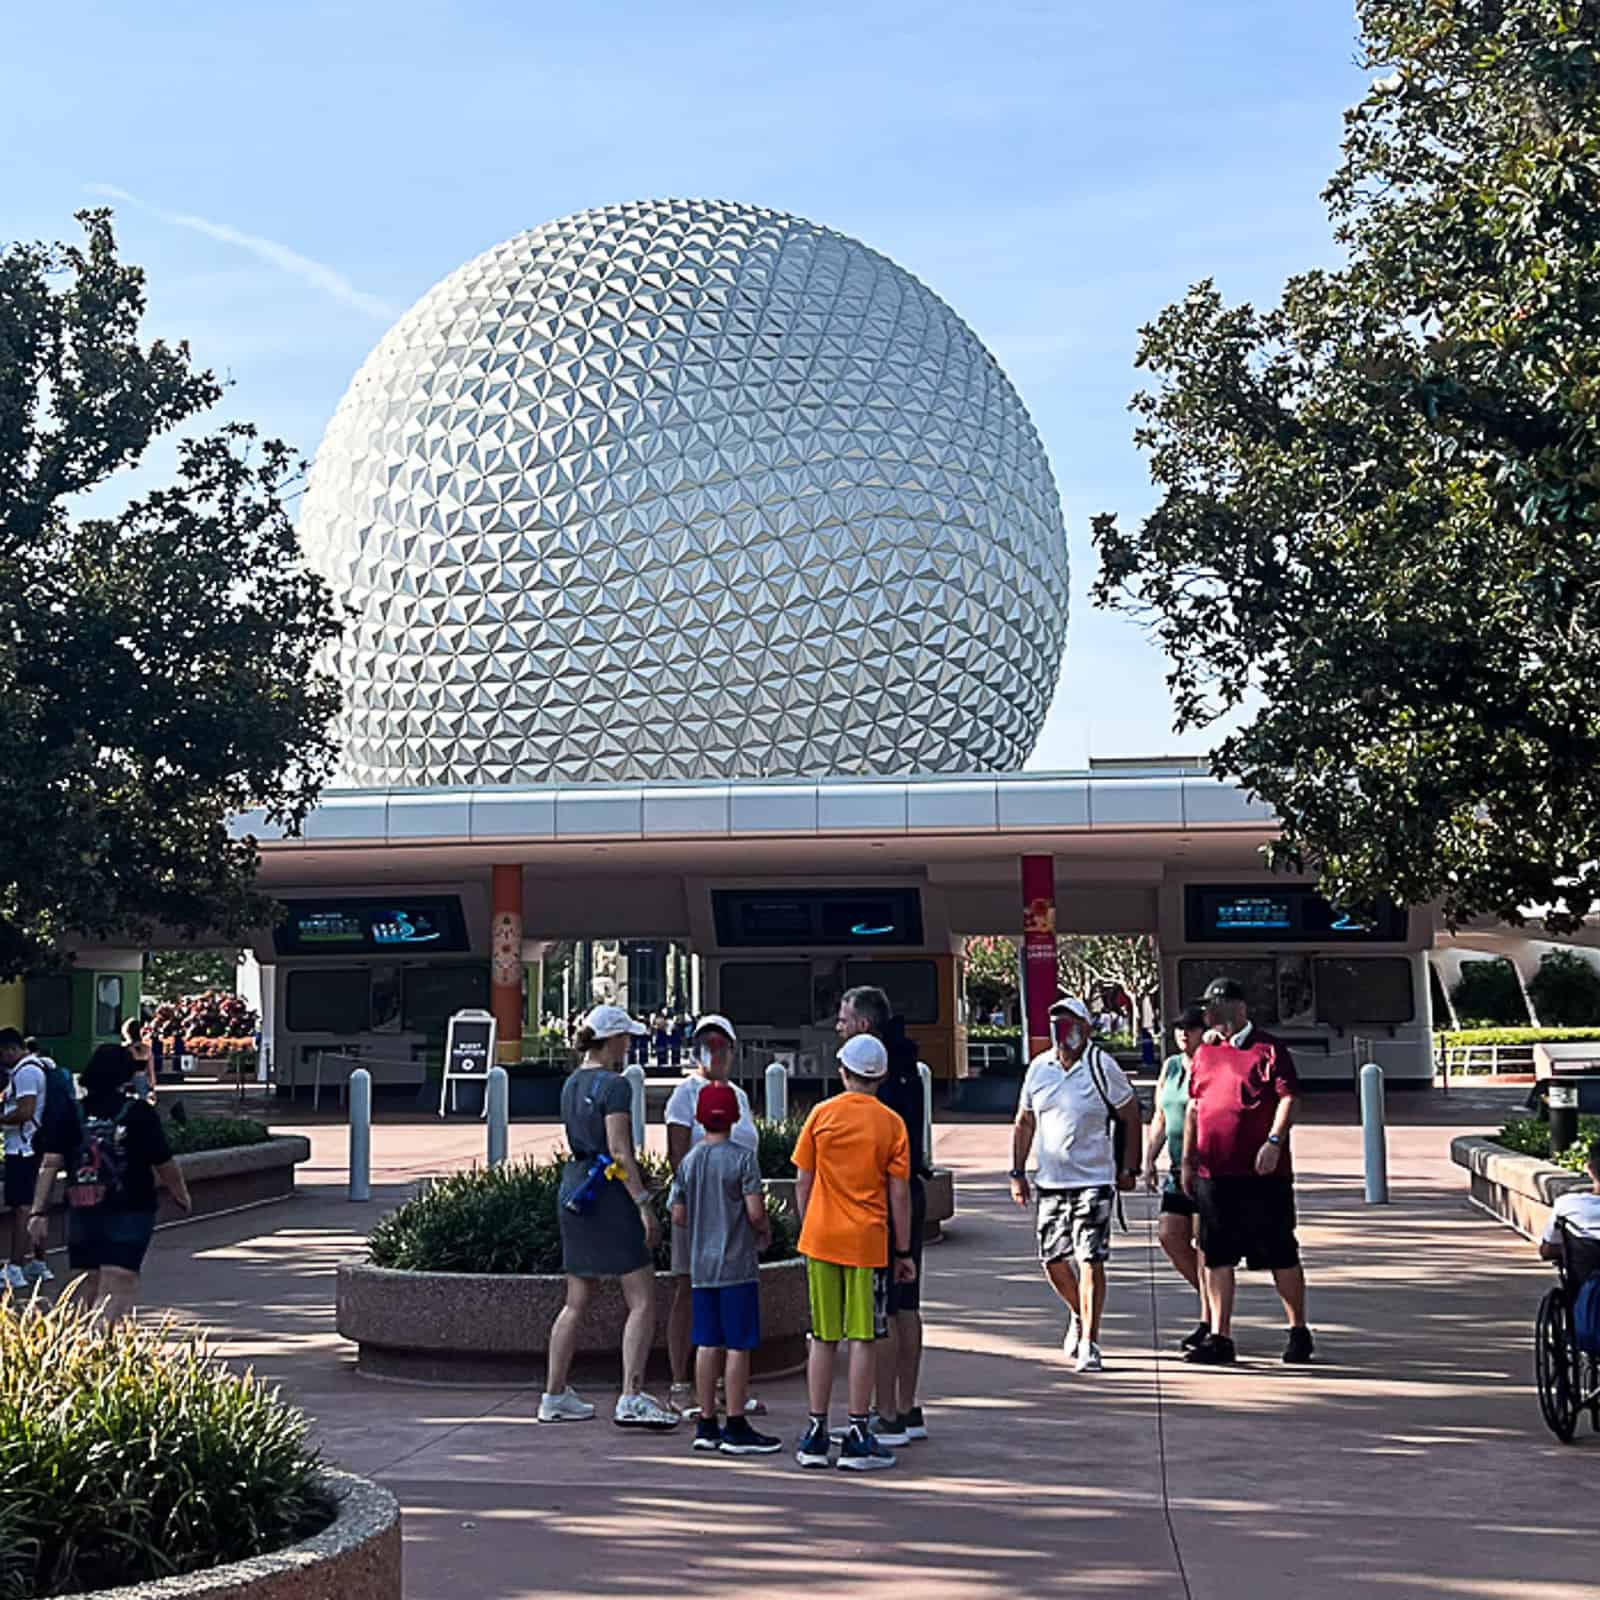 How To Stay Cool at Disney World Epcot Park in the Summer Hot Months